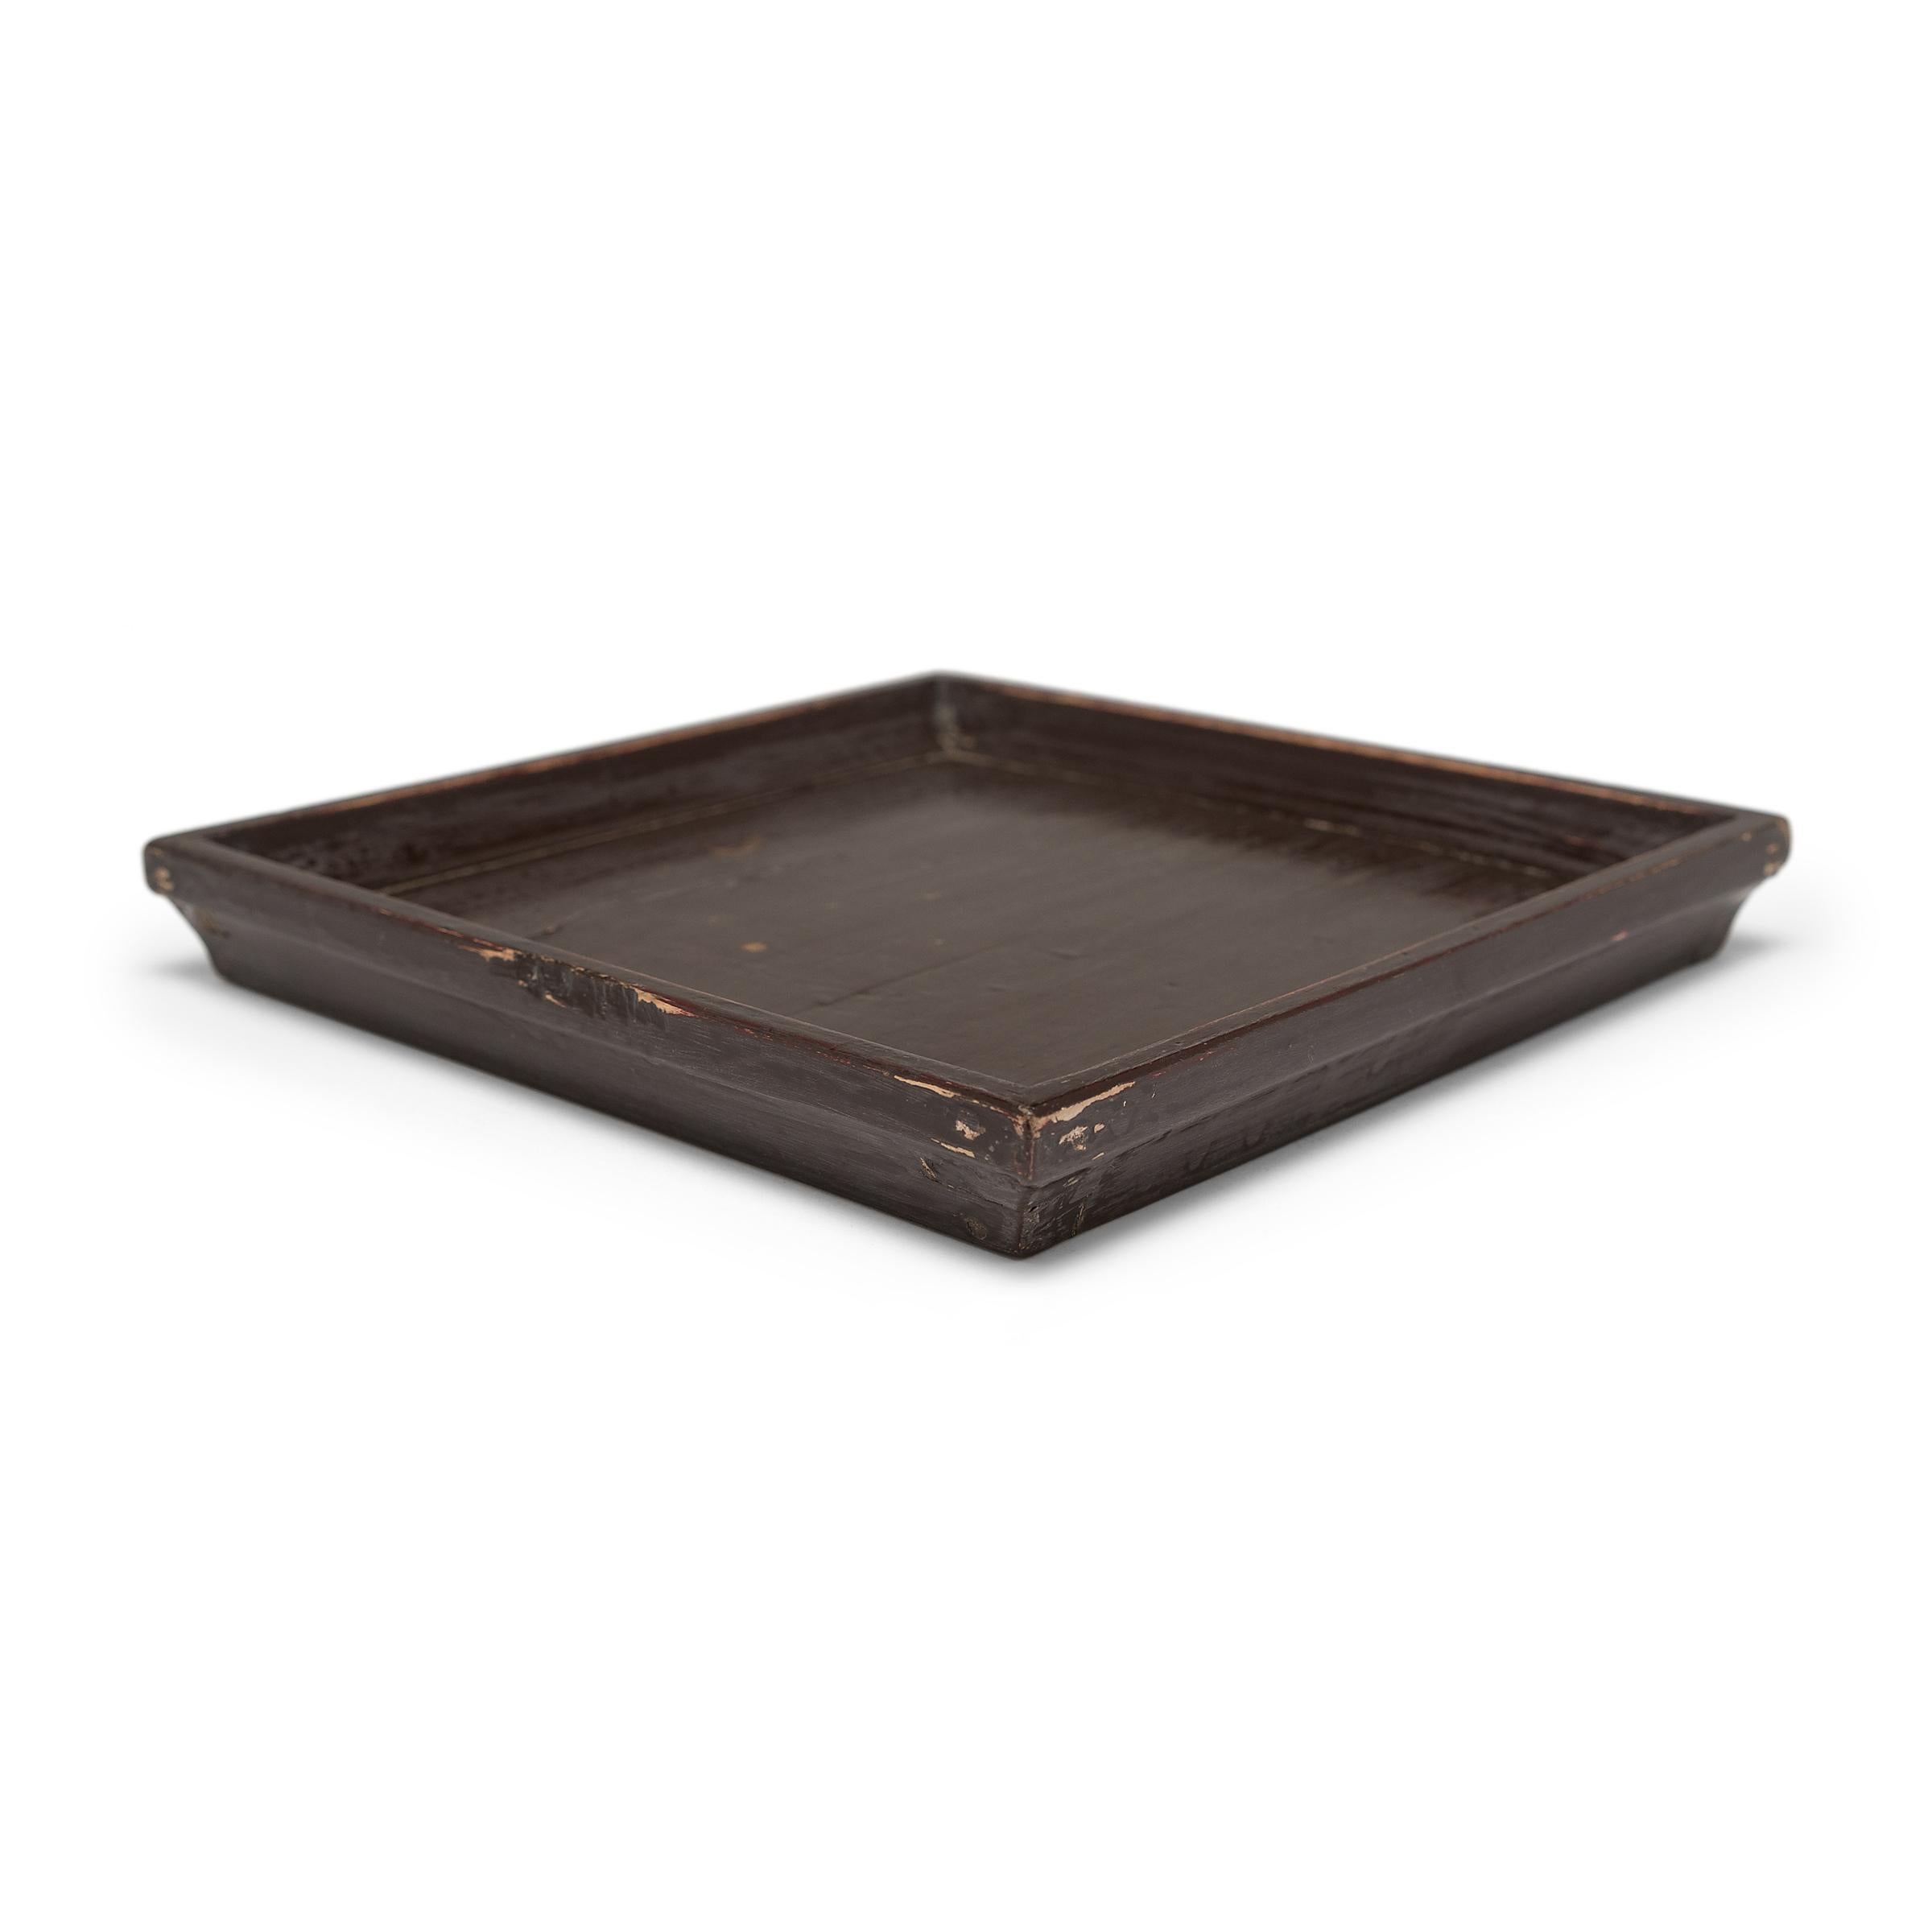 Simple lines, a modest form, and a layer of hand-brushed lacquer give this petite Qing-dynasty tray a provincial charm that recalls the warmth of home. The dark brown lacquer finish has weathered with time to reveal the light brown coloring of its